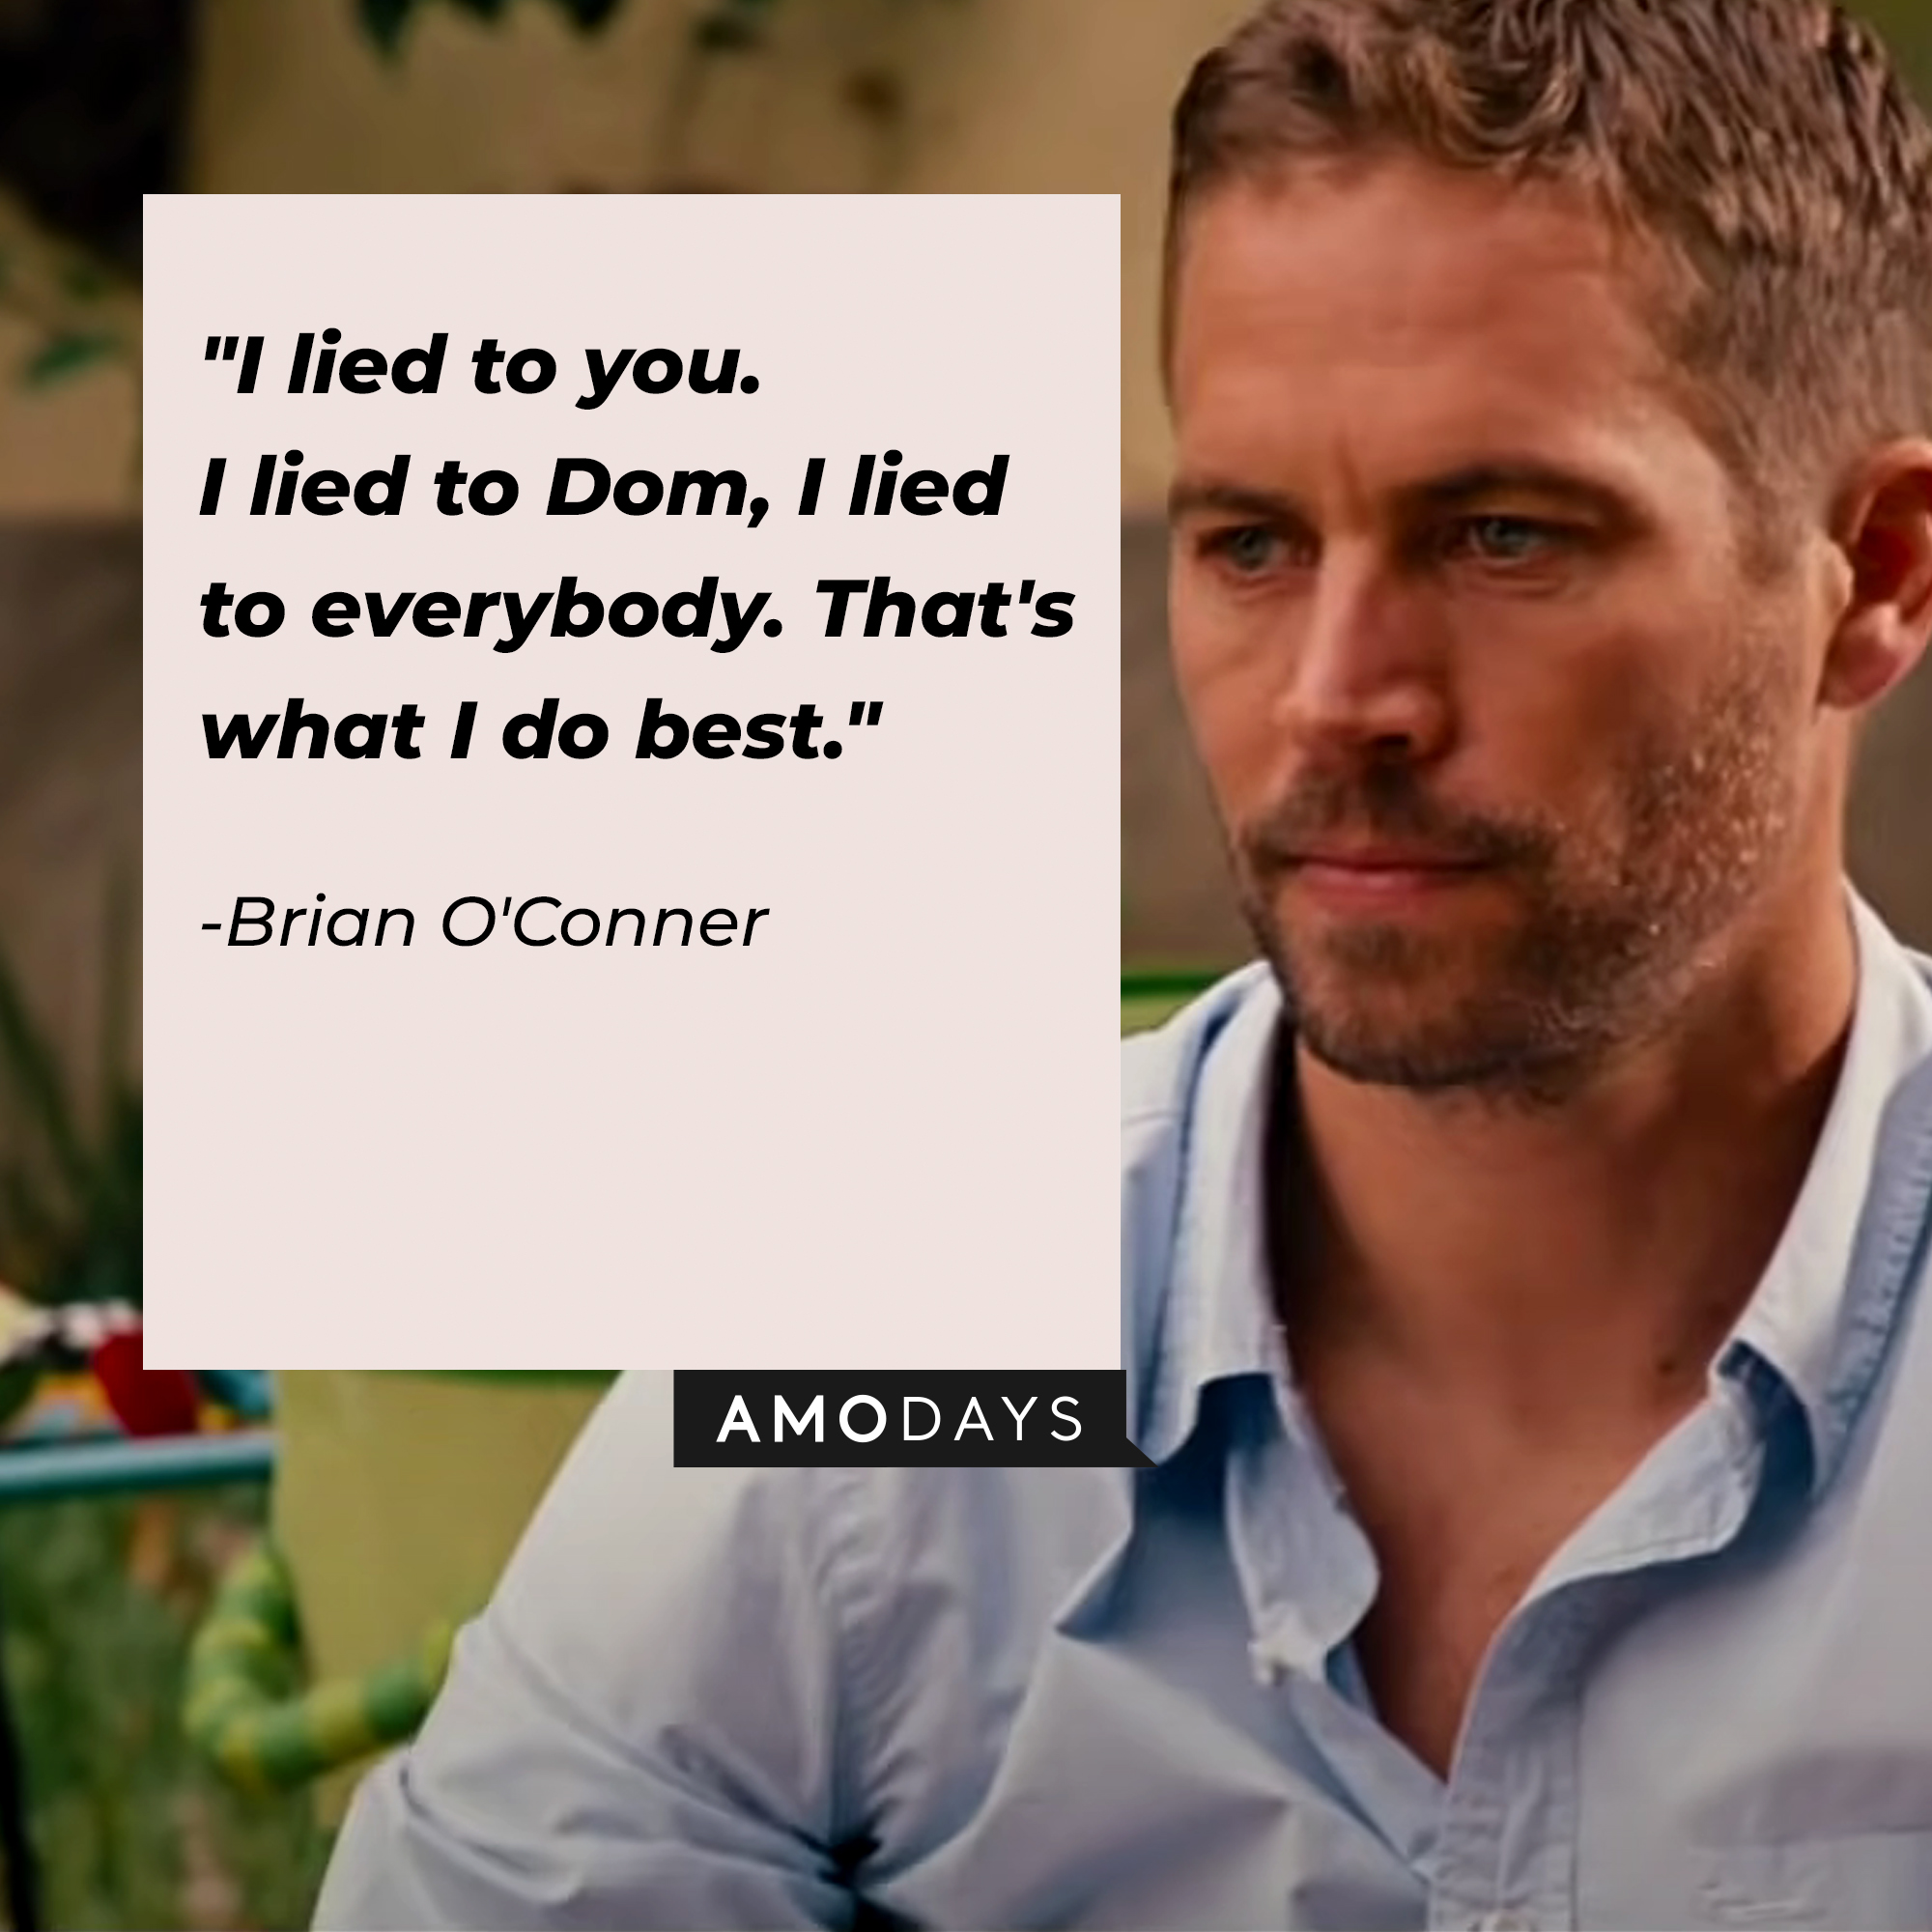 Brian O'Conner, with his quote: “I lied to you. I lied to Dom, I lied to everybody. That's what I do best.” | Source: facebook.com/TheFastSaga